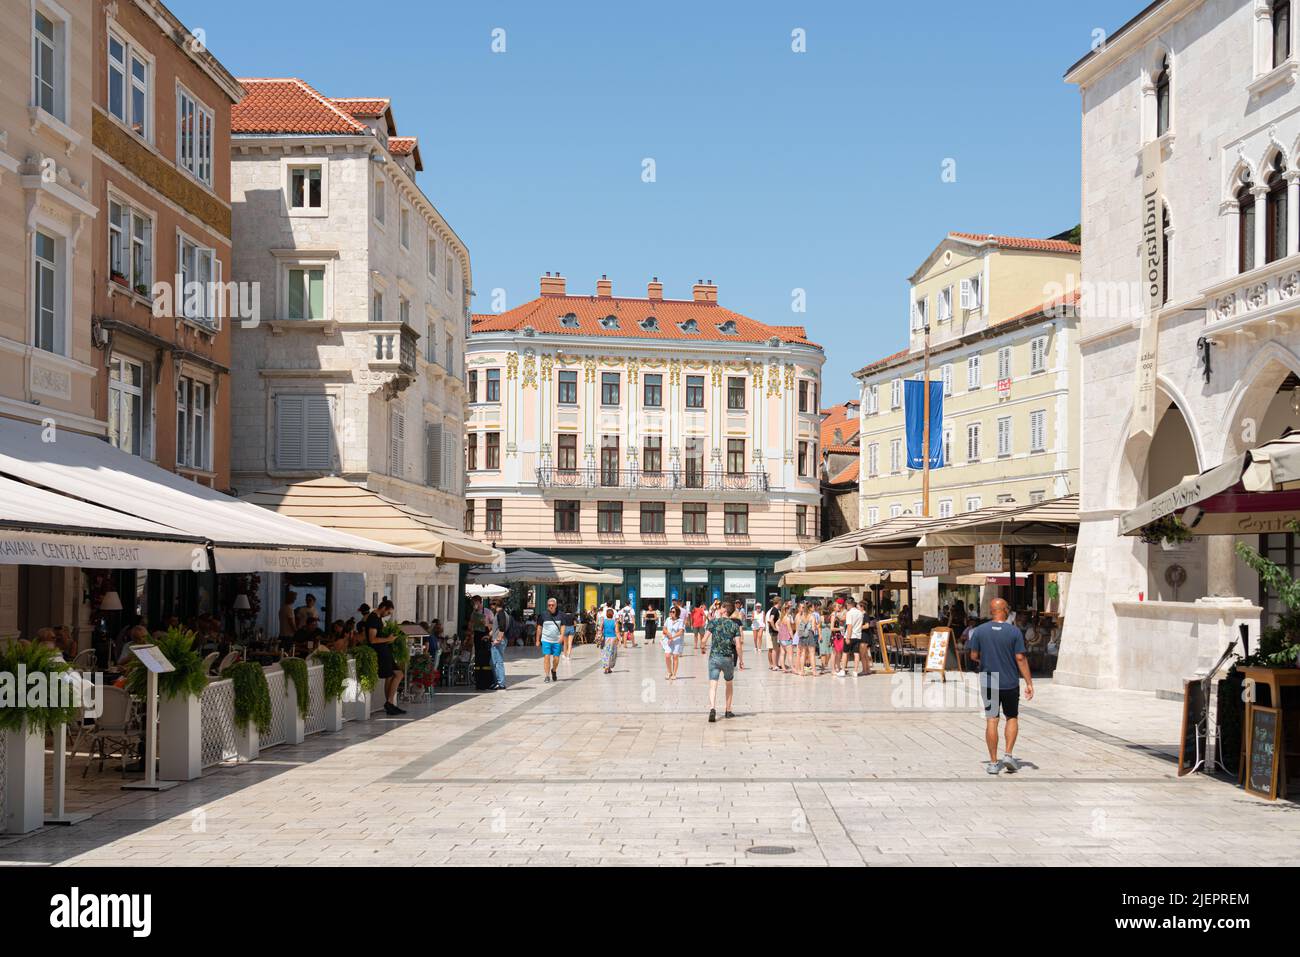 SPLIT, CROATIA - JULY 30, 2021: Busy Streets Of Downtown Old Center Of Split City, People On Some Of The Most Important Landmark Avenues And Streets Stock Photo